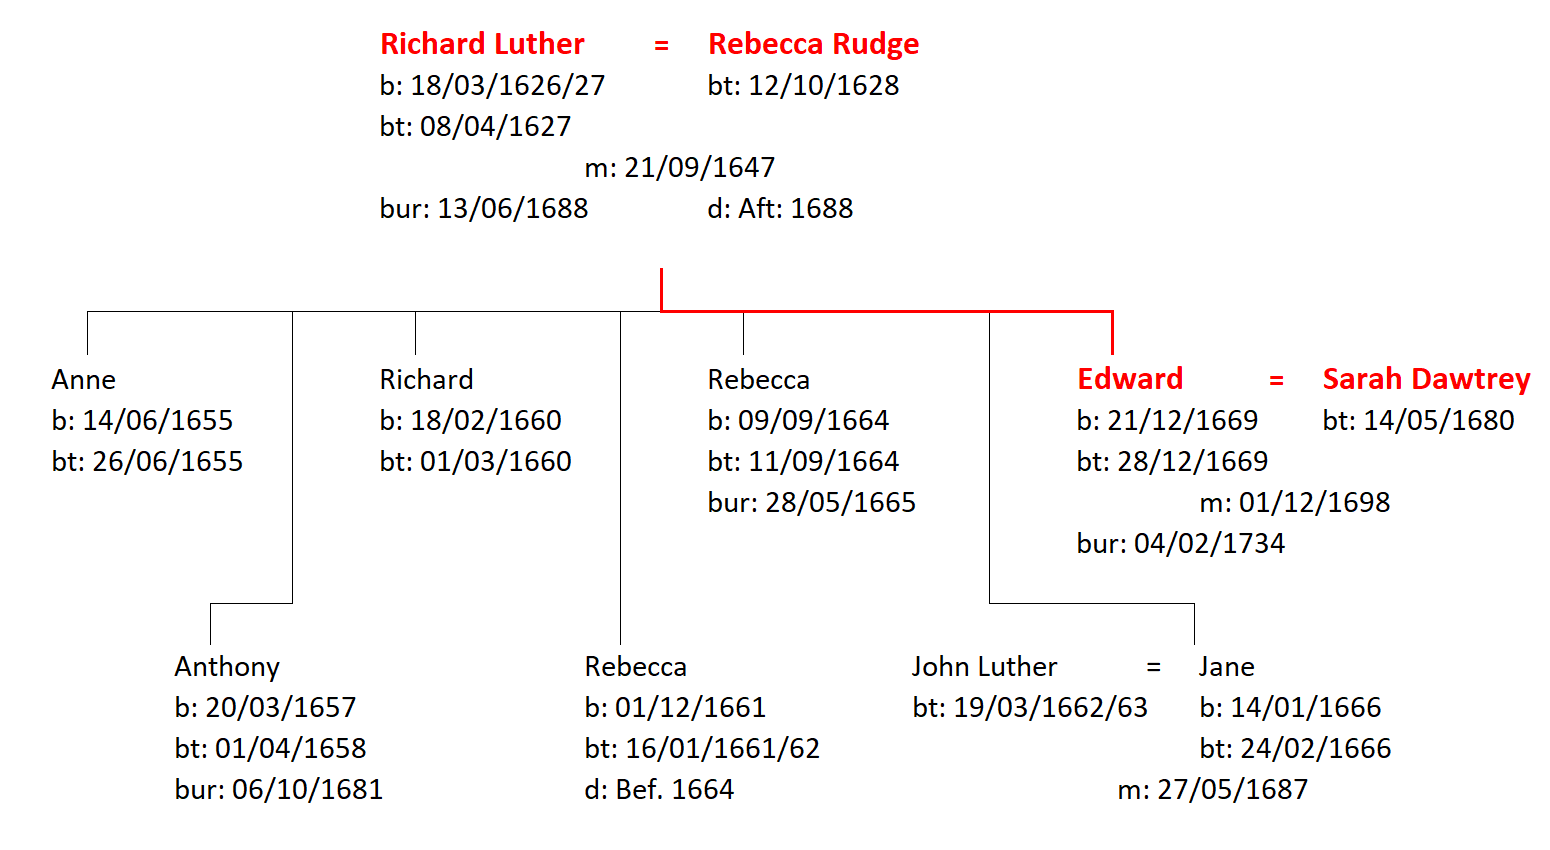 Figure 2: The Family of Richard and Rebecca Luther